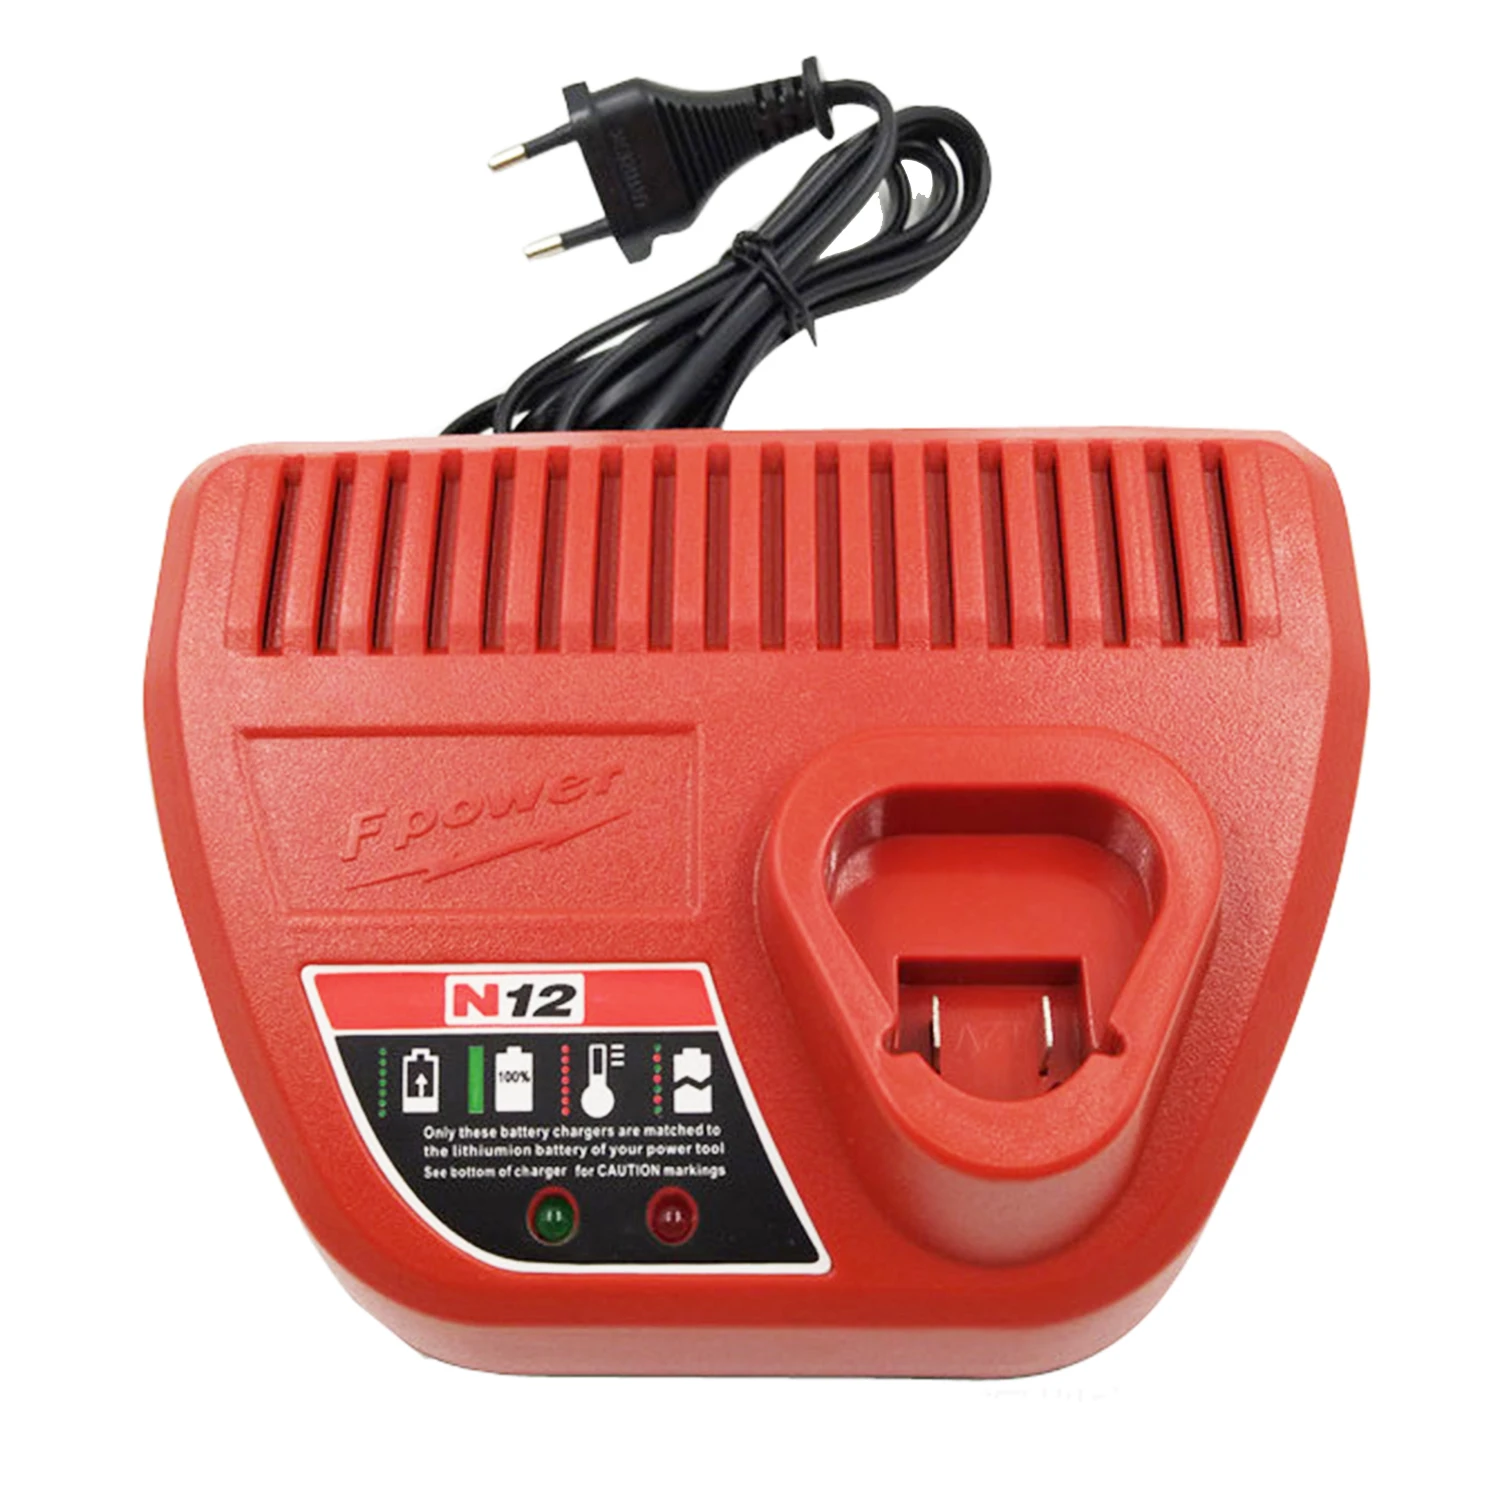 

charger for Milwaukee battery 12V lithium ion power tools M12 charger N12 48-59-2401 48-11-2402 drill battery charger